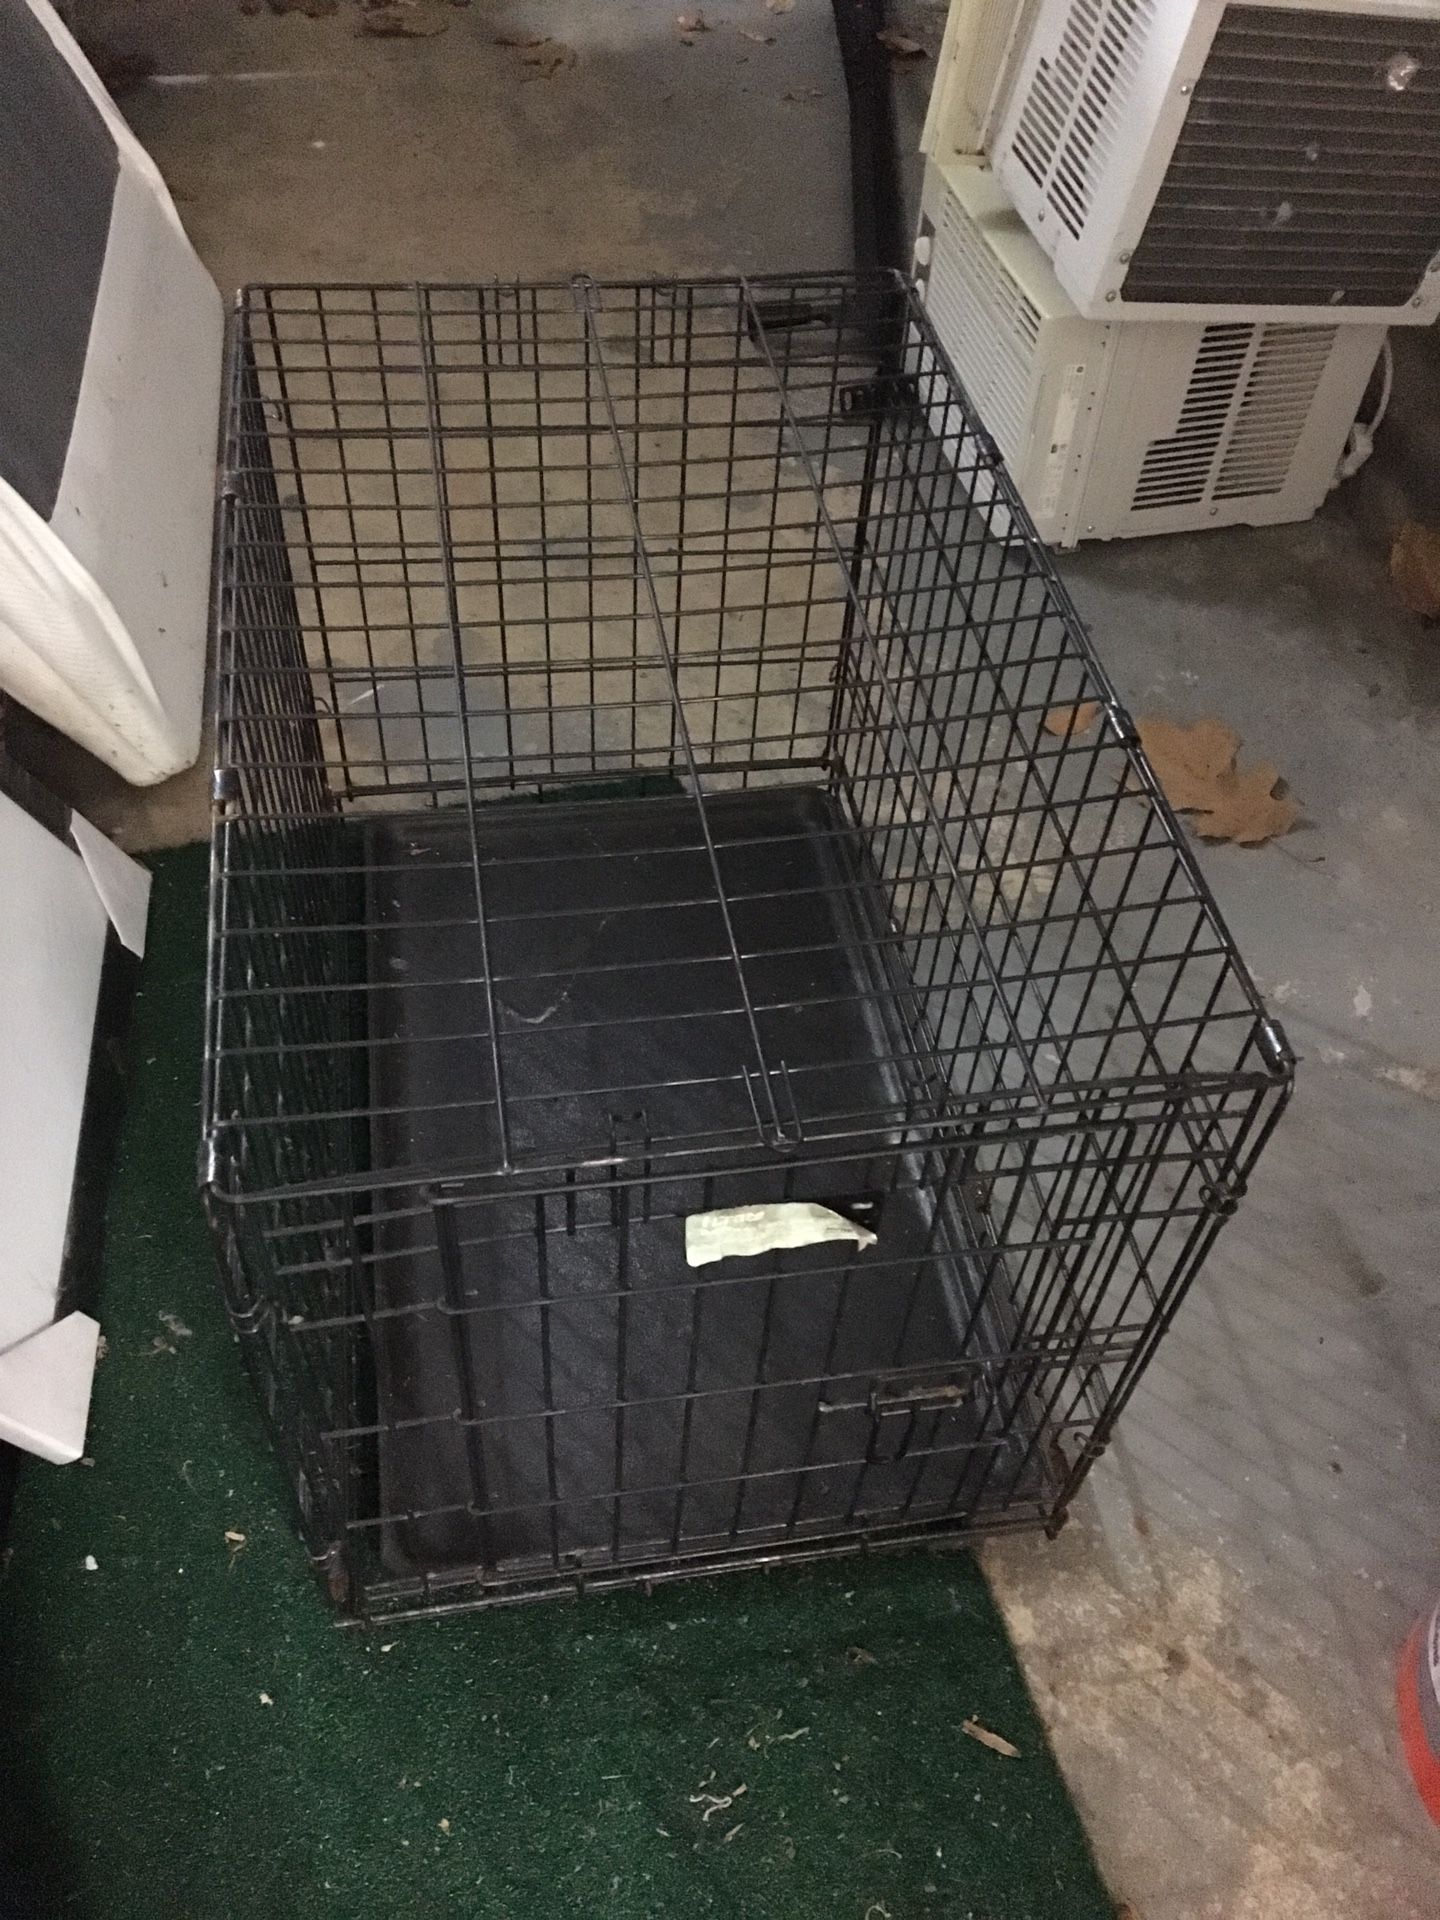 Mid size dog cage